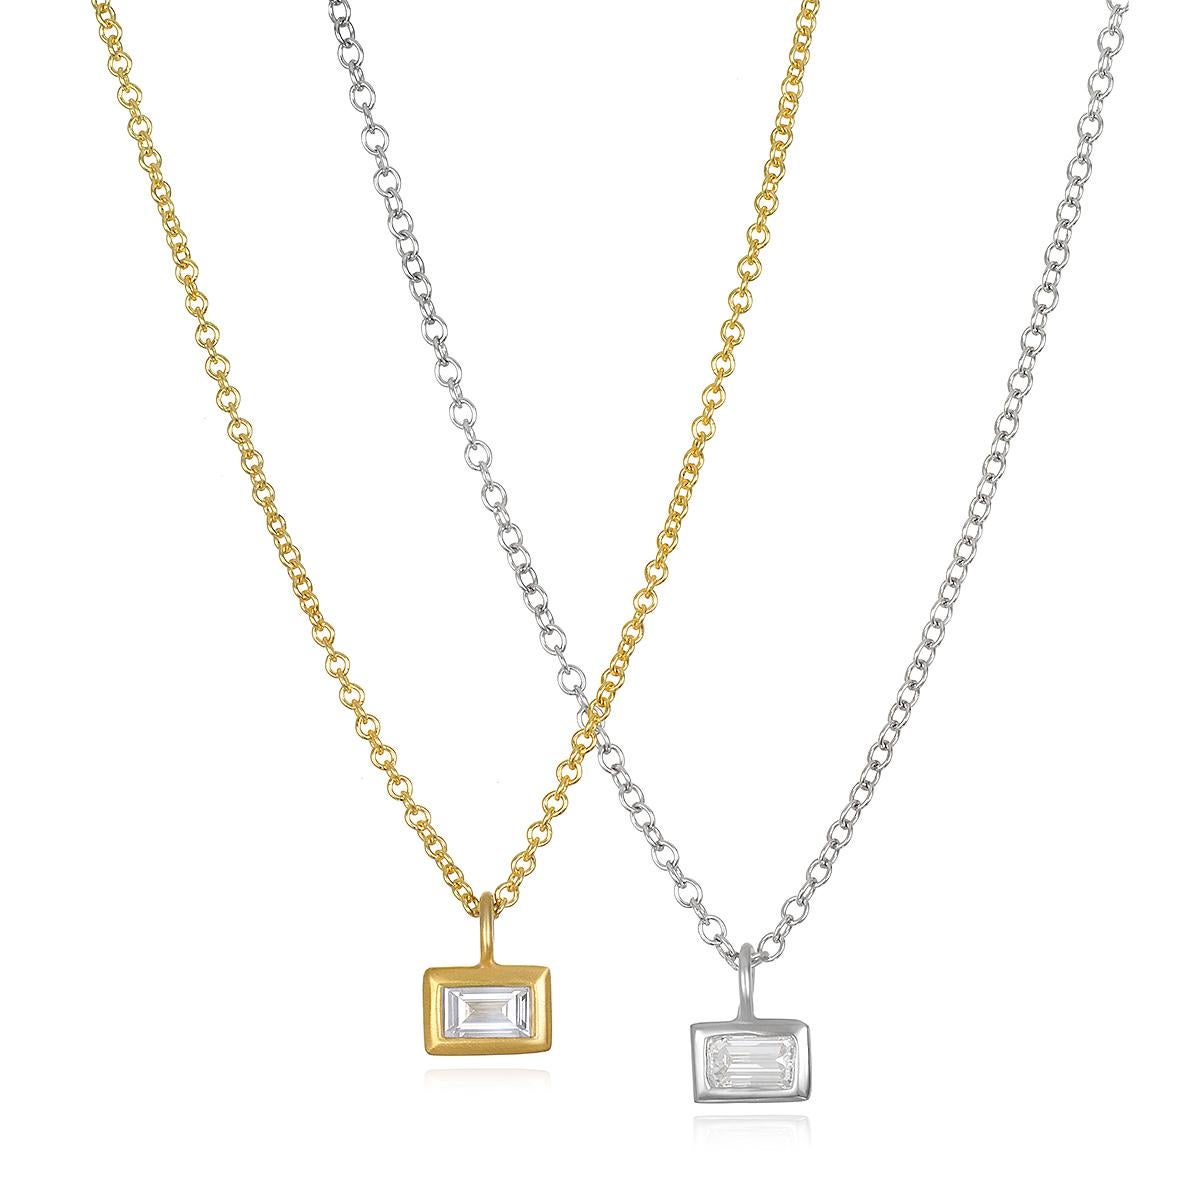 Faye Kim's 18k White Gold Diamond Baguette Drop Necklace with a bezel setting is a simple, classic design.
A little twist on the classic station necklace, the pendant design allows for movement. Whether your style is traditional or contemporary,